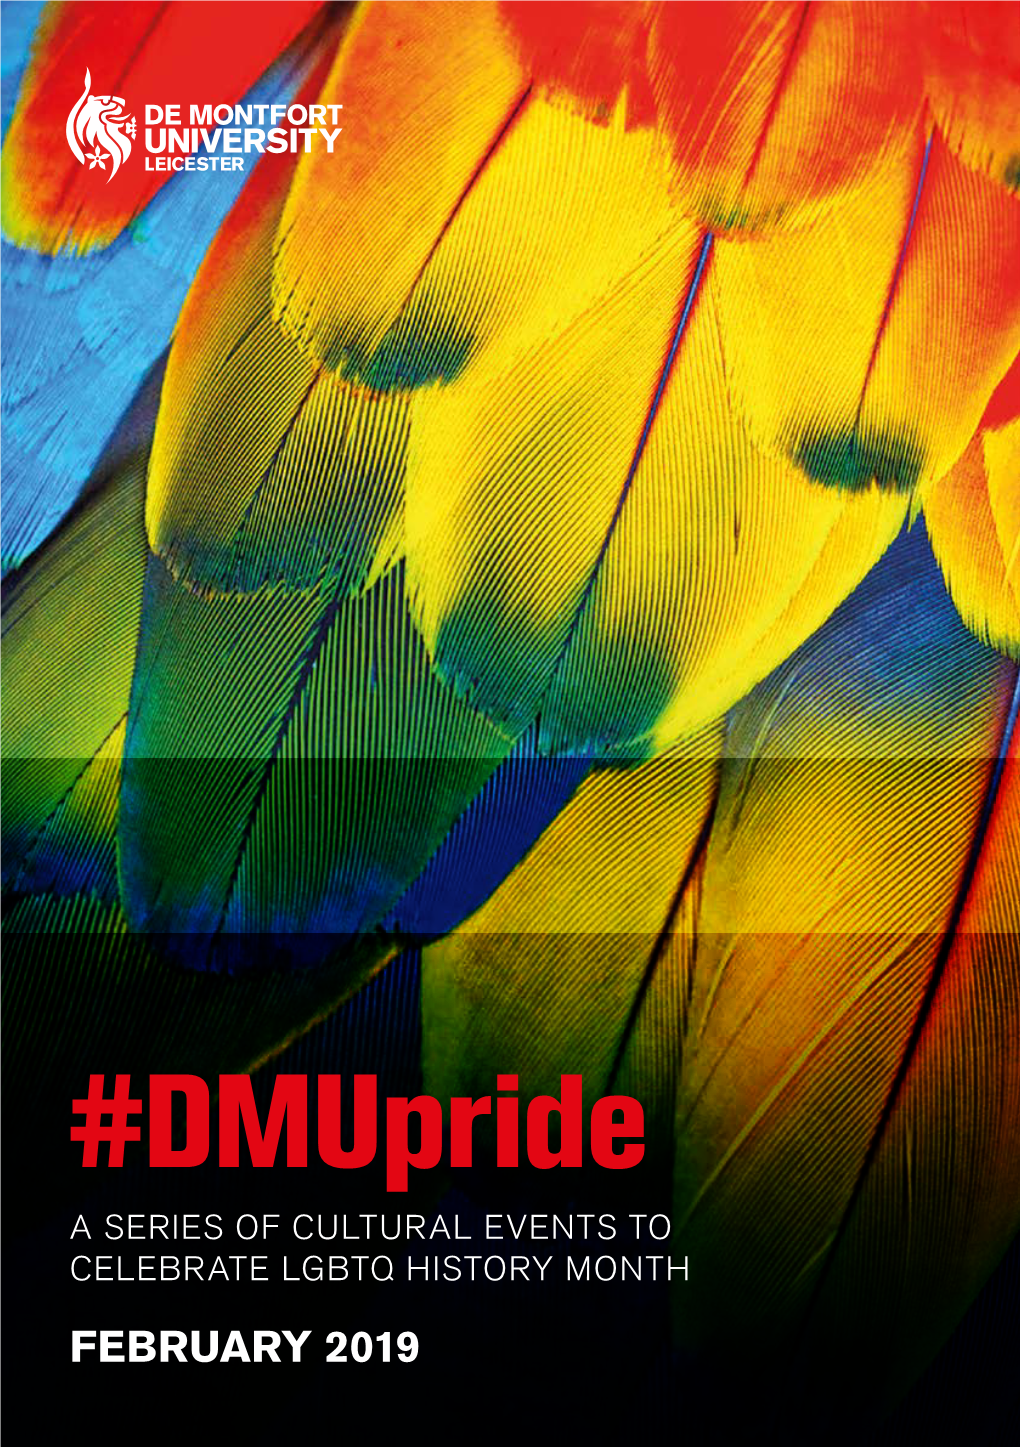 Dmupride a SERIES of CULTURAL EVENTS to CELEBRATE LGBTQ HISTORY MONTH FEBRUARY 2019